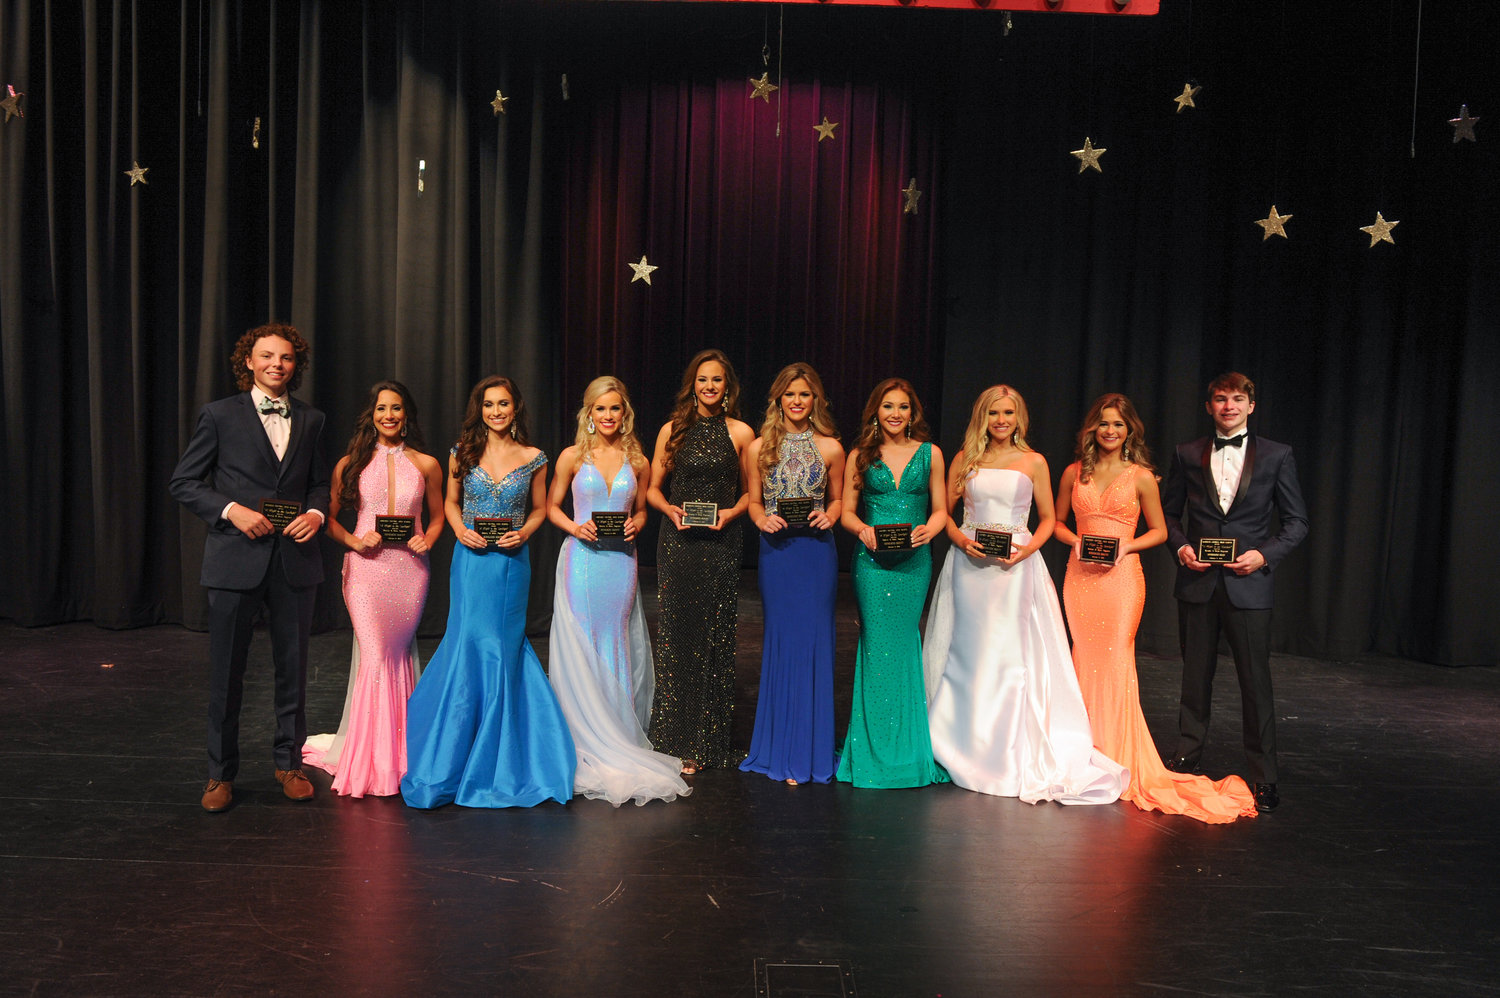 Madison Central High School hosted its annual Beauty and Beau pageant the week of February 8. Tuesday, February 9 was sophomore night. Pictured are the winners. Left to right are beau Kamden Boyd, beauties Mary Scott Garrard, Avery Brady, Mary Kate Sandifer, Olivia Davidson, Megan Stokes, Davan Zenor, Bergen Bianchi, Casey Pierce and beau Aiden Allen.